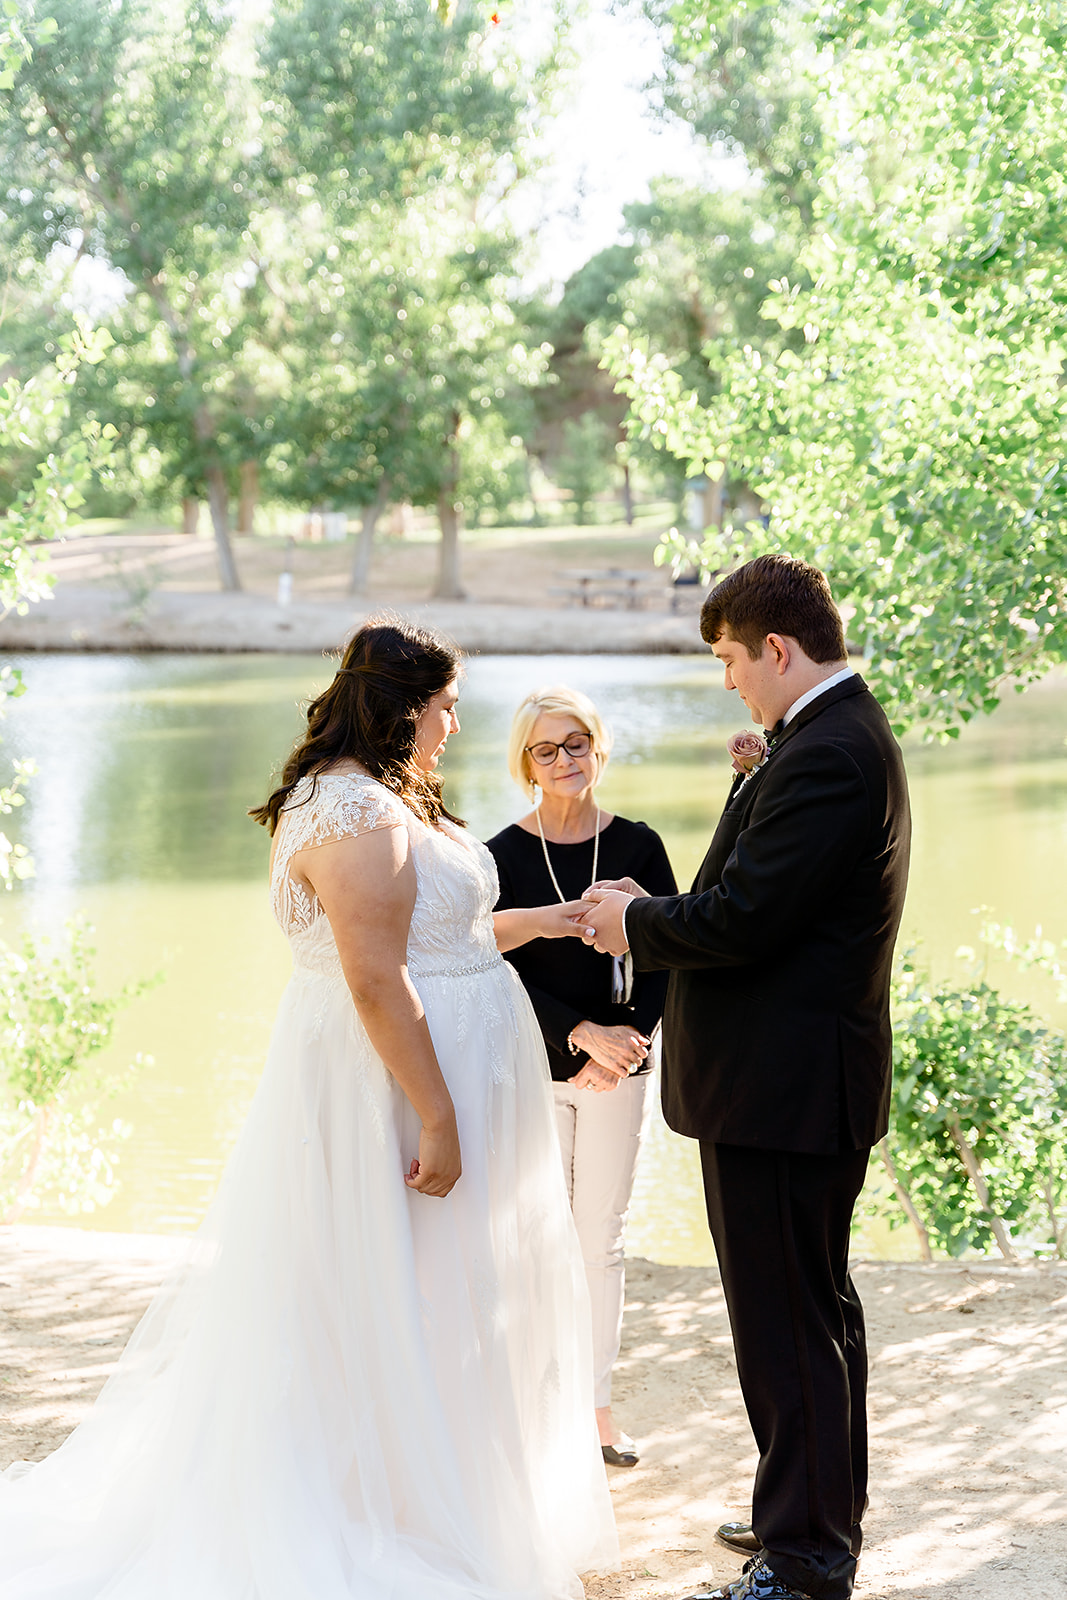 Bride and groom standing before officiant during their elopement arranged by Elopement Las Vegas